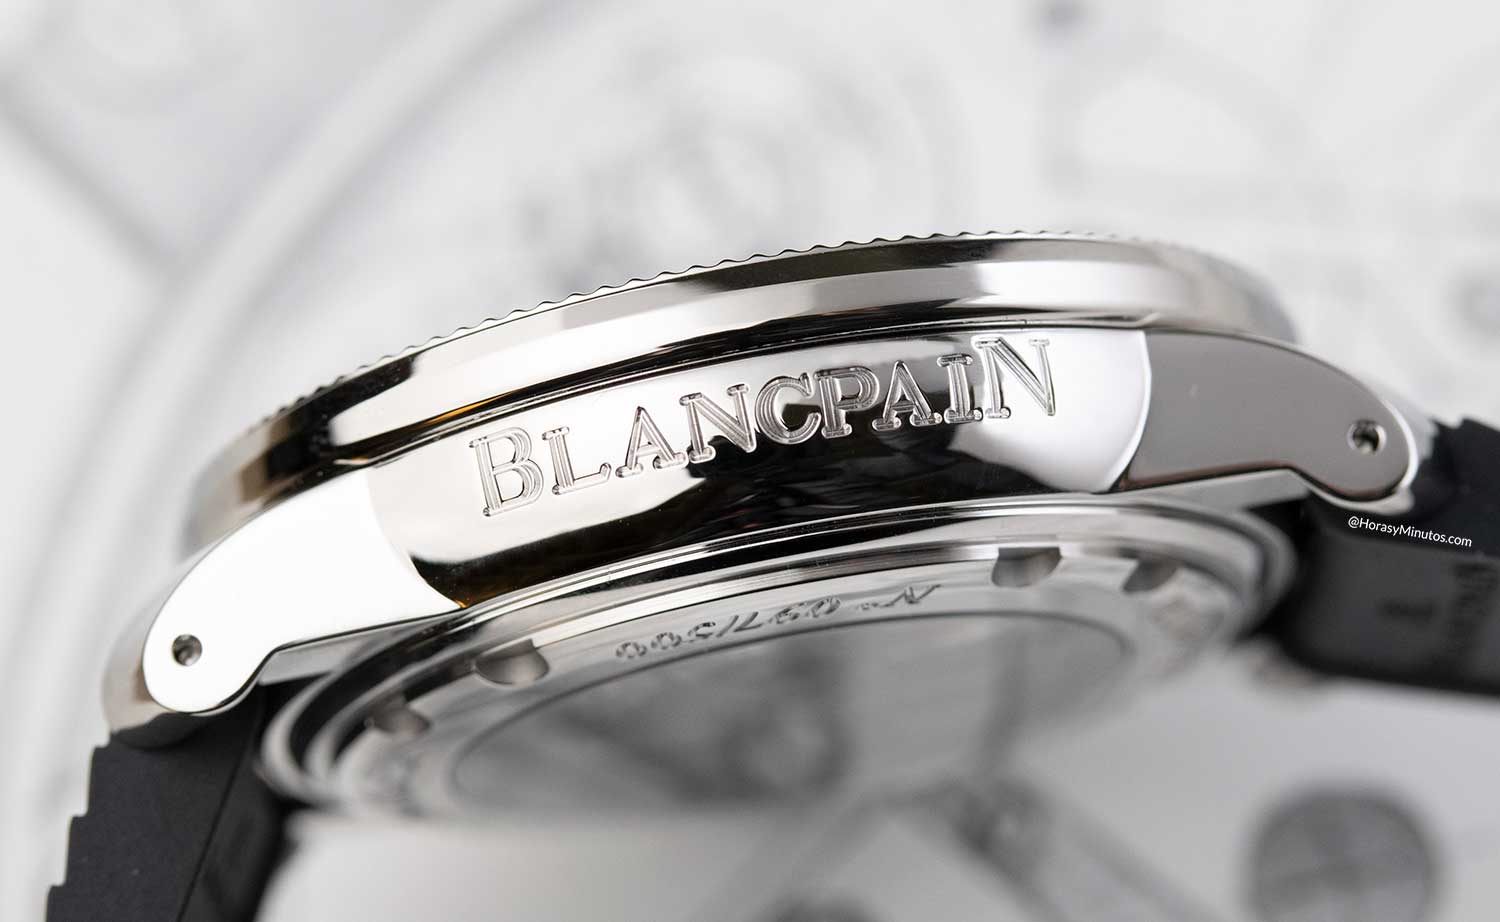 Lateral del Blancpain Tribute to Fifty Fathoms No Rad